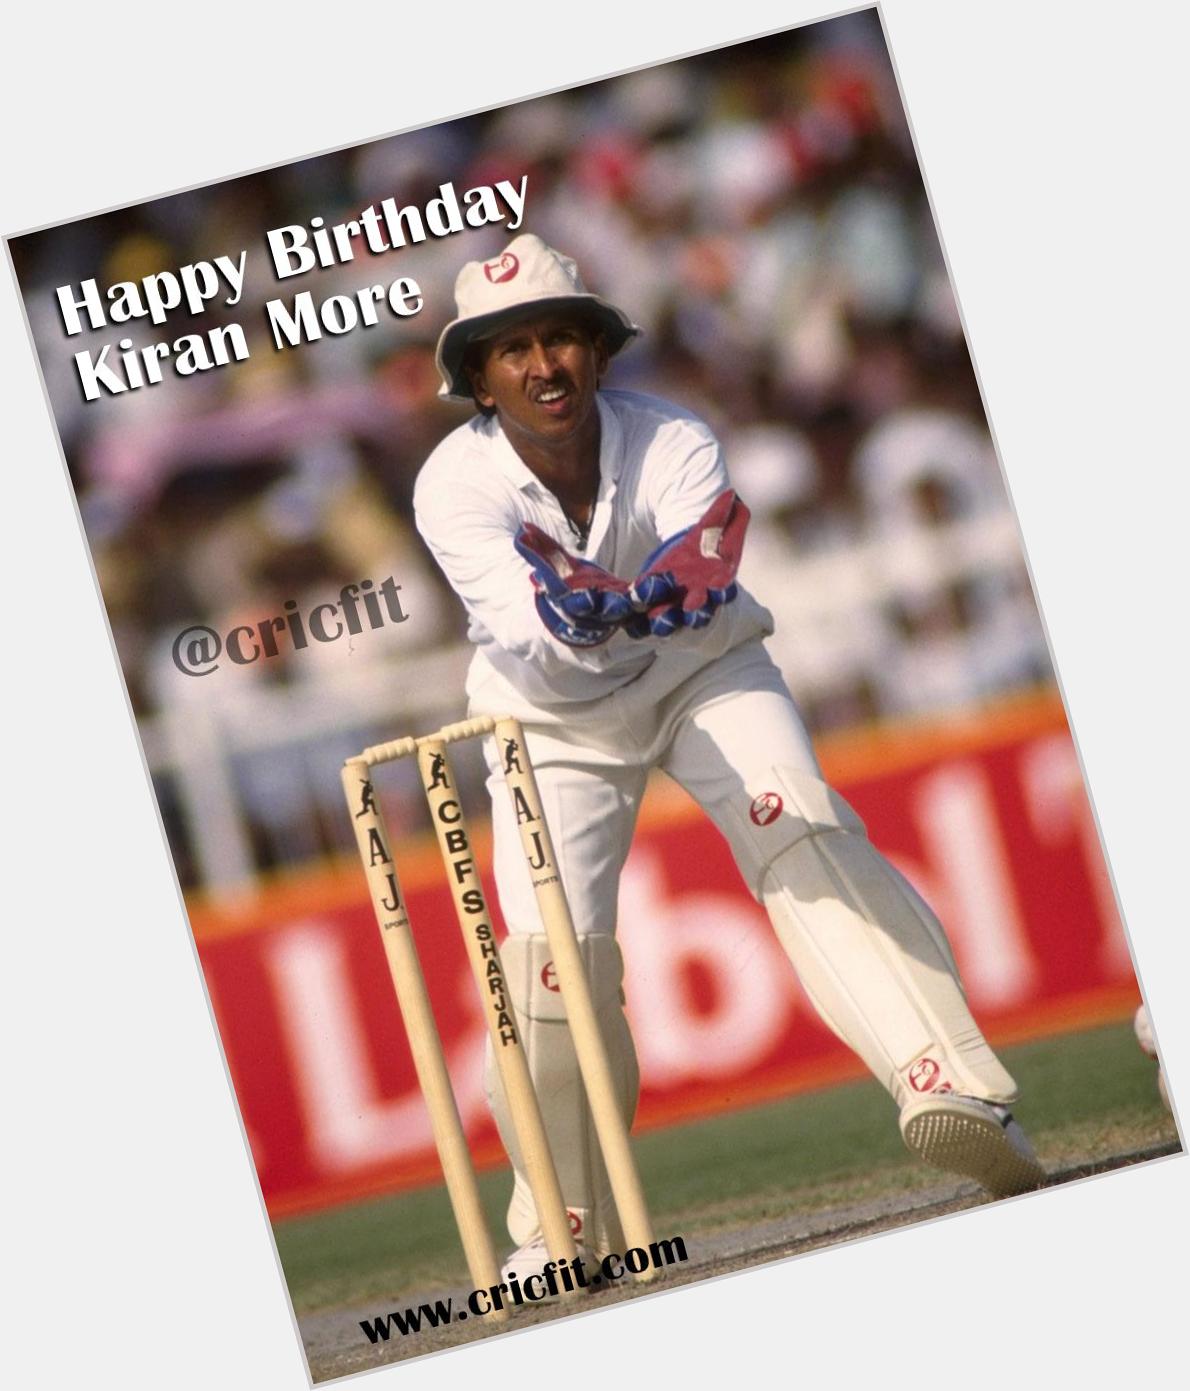 Happy Birthday to former Indian wicket-keeper Kiran More  